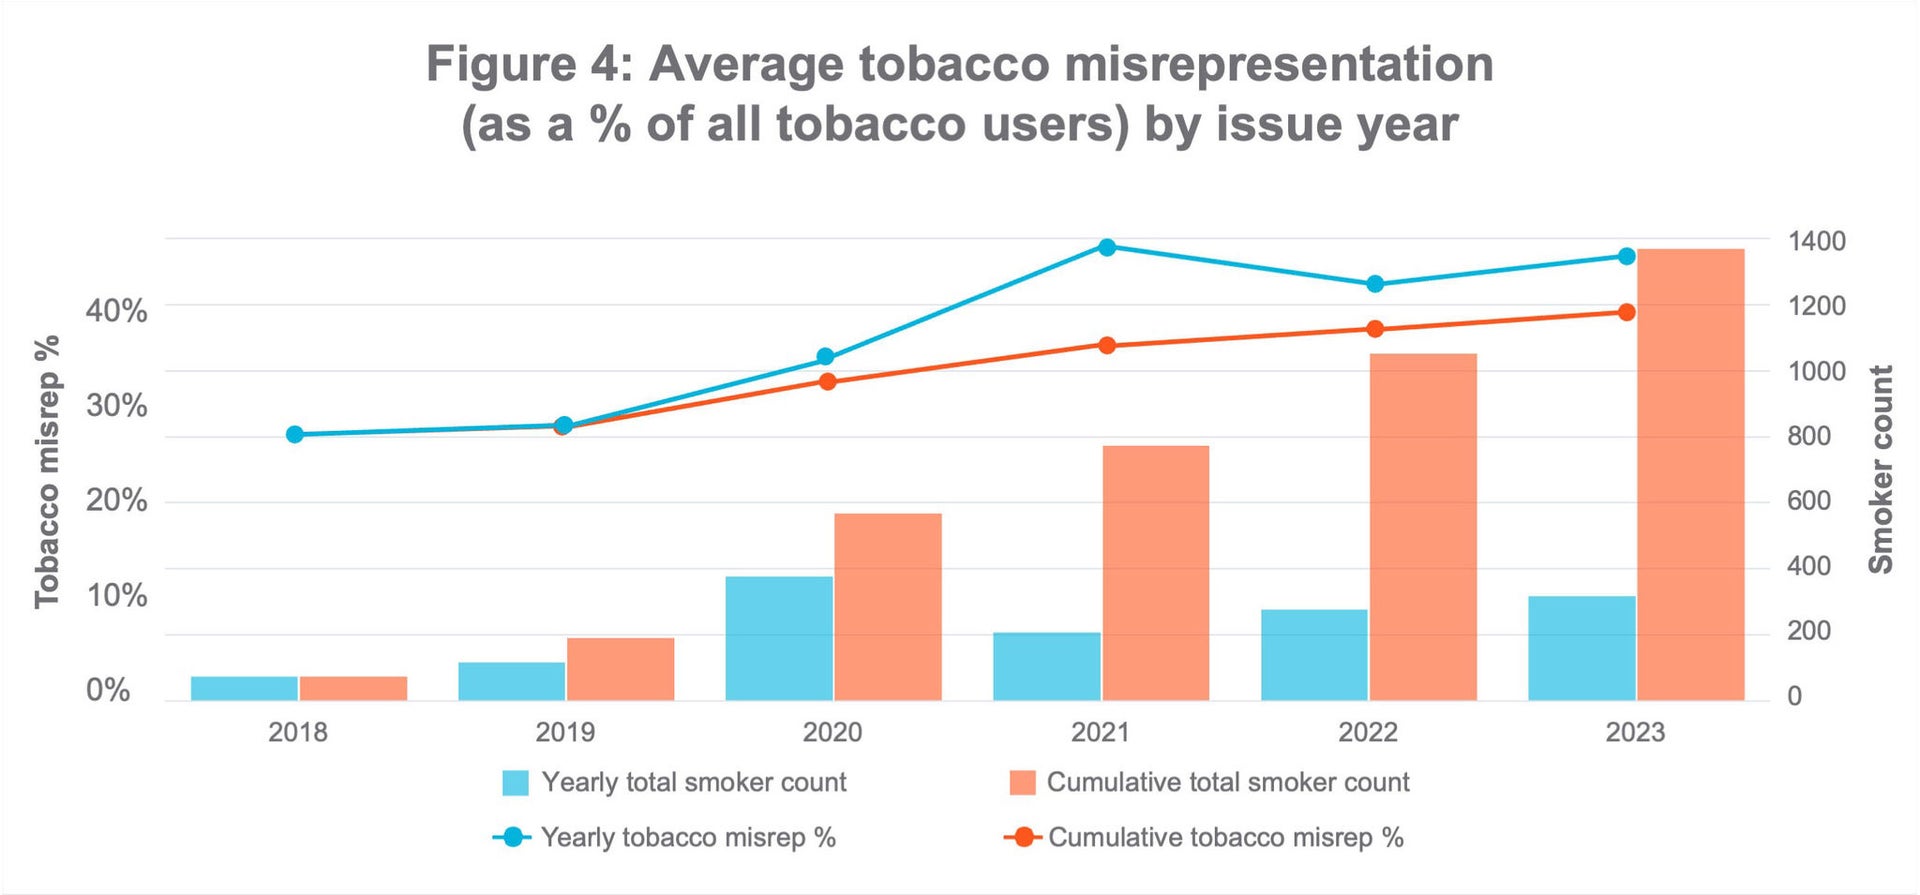 Bar graph showing the average tobacco misrepresentation by issue year.